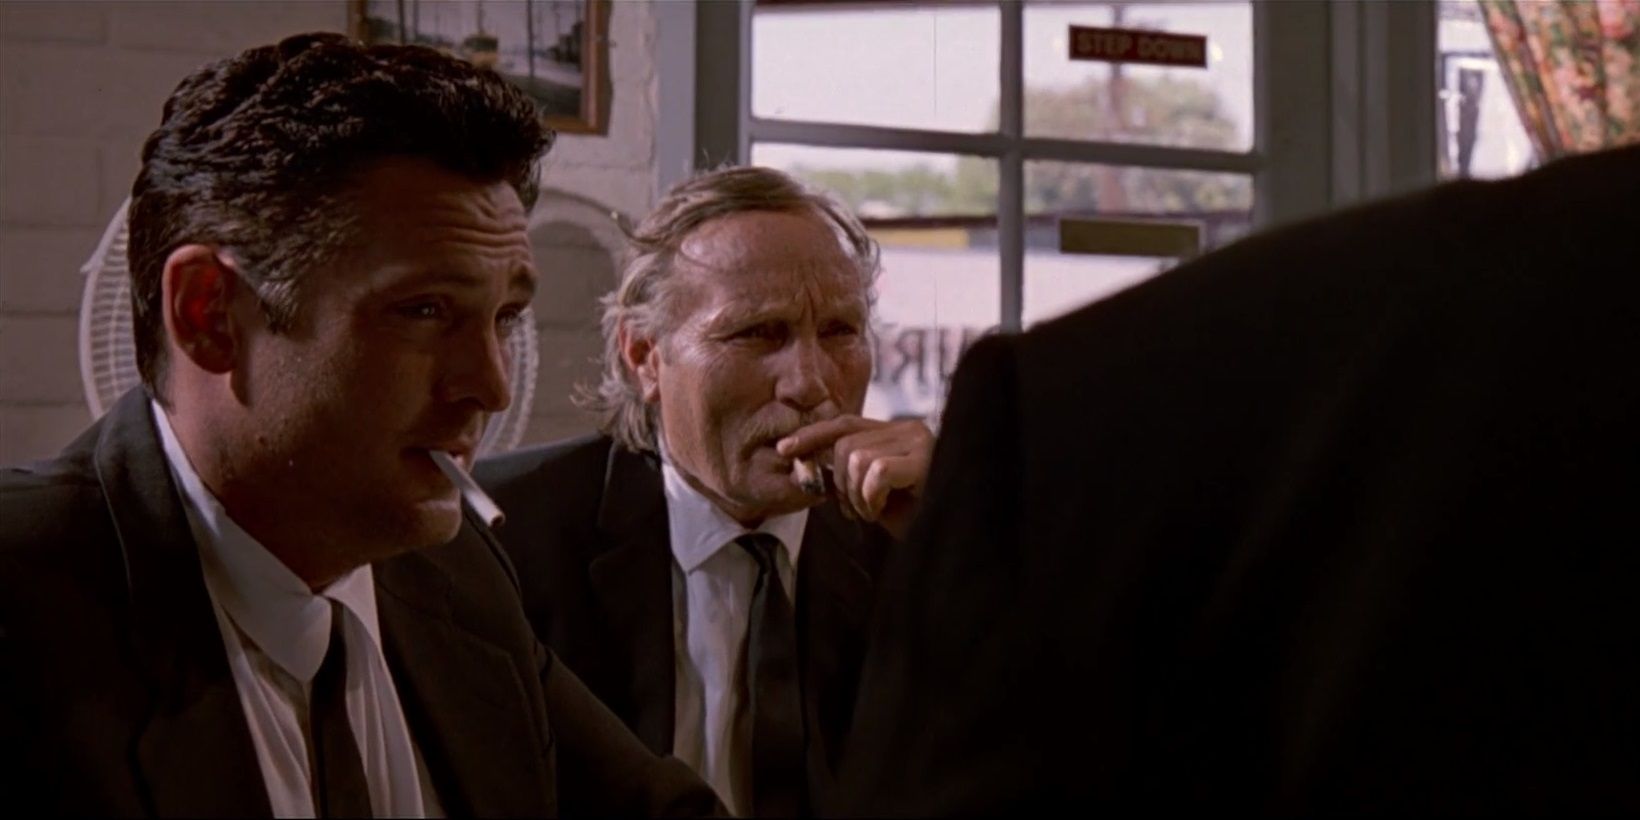 The opening shot of Reservoir Dogs